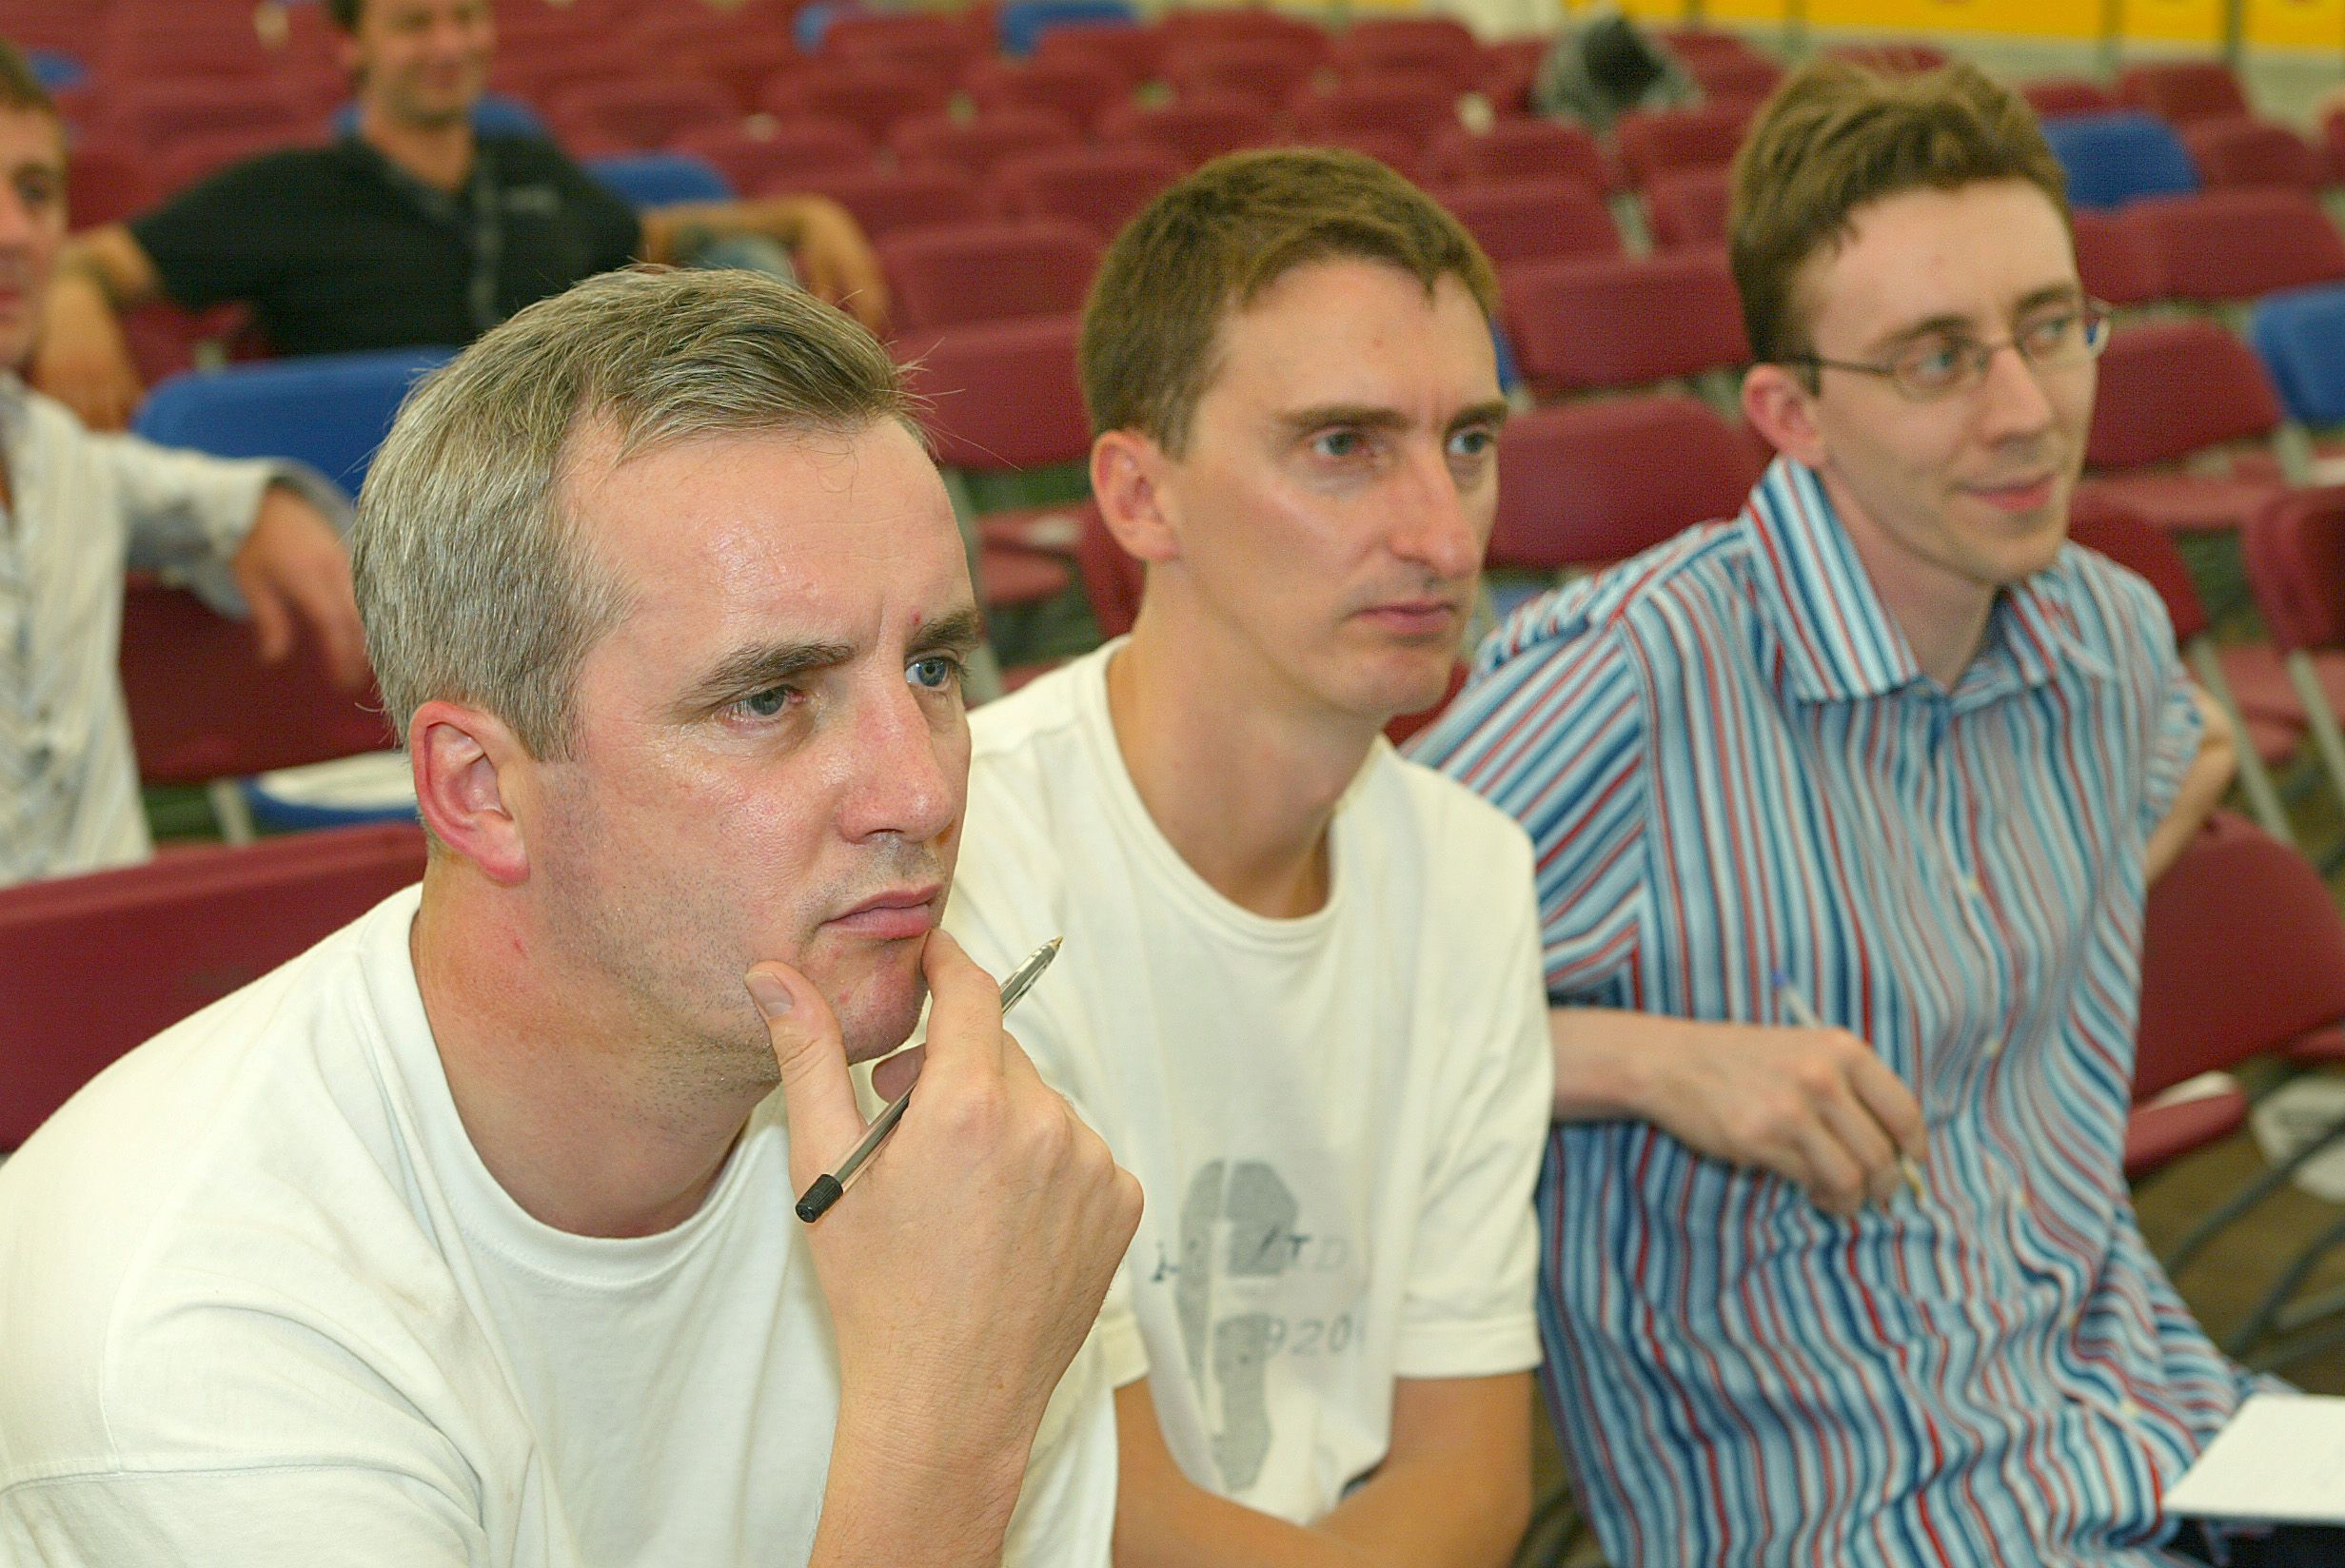 Robin Livingstone at a 2003 press conference with colleagues Gearóid Ó Muilleoir and Ed McCann